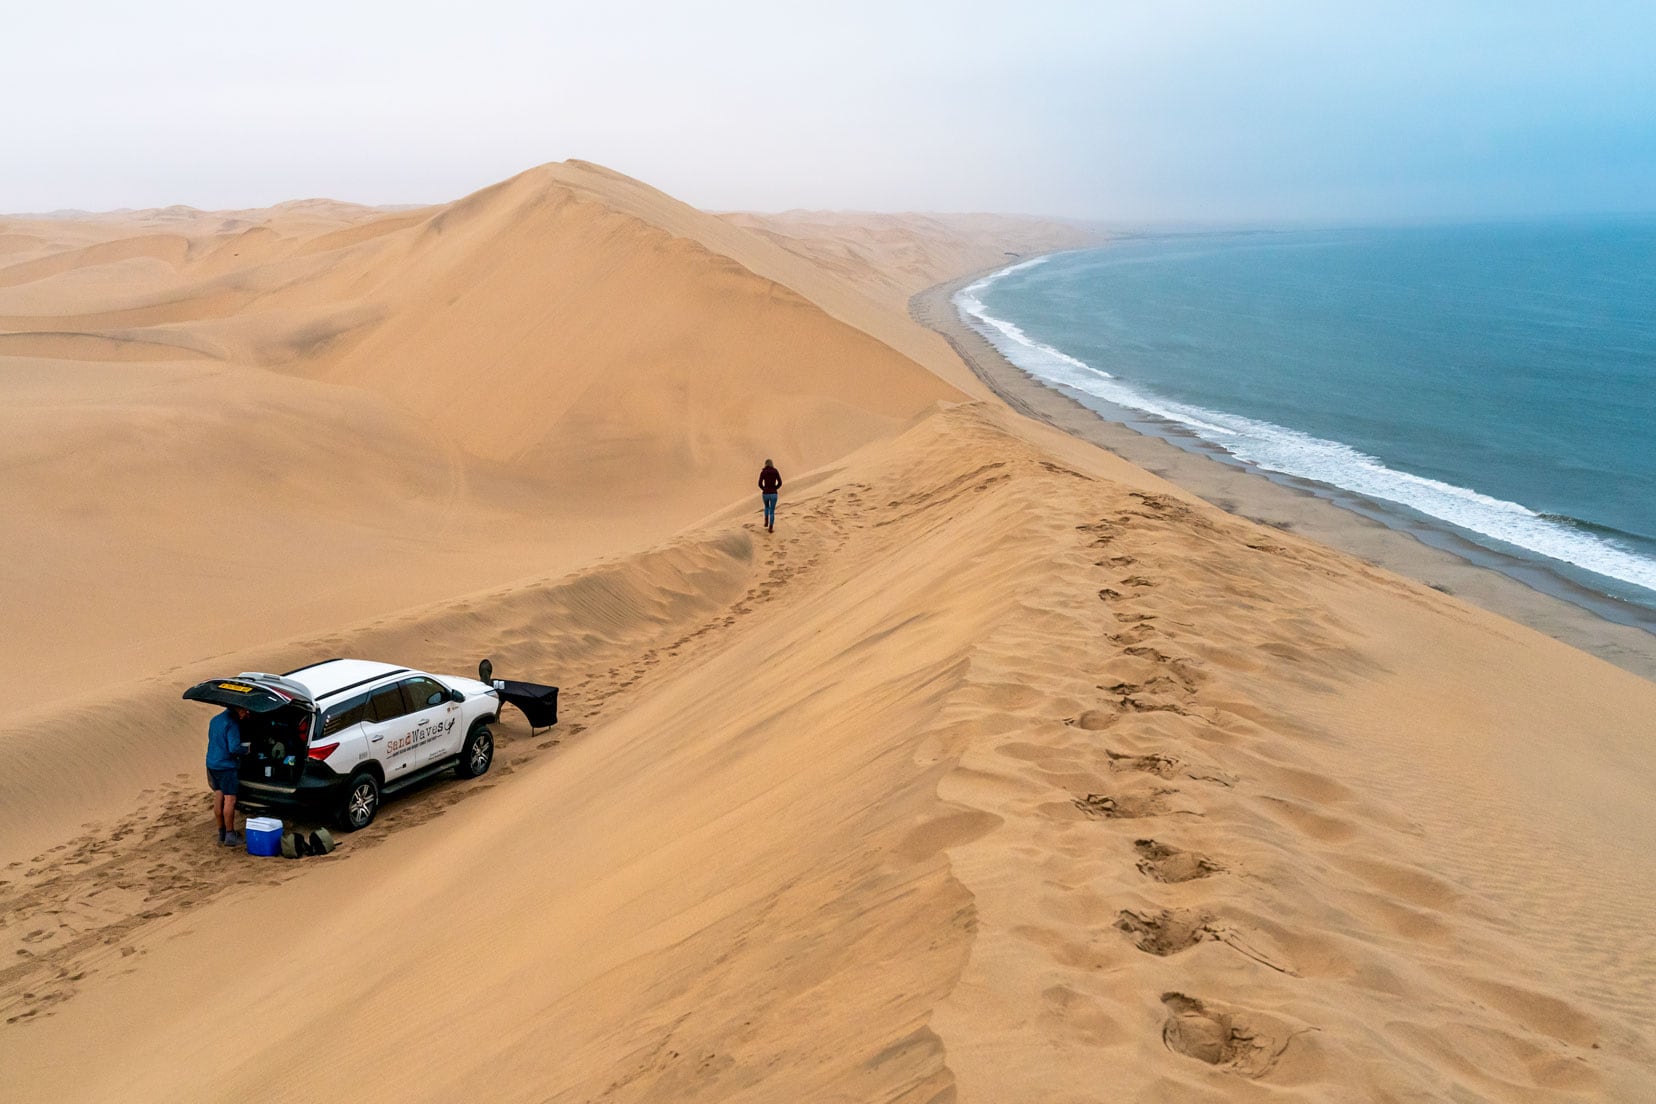 early-morning-fog-with a car-parked-up-in-dunes overlooking the sea